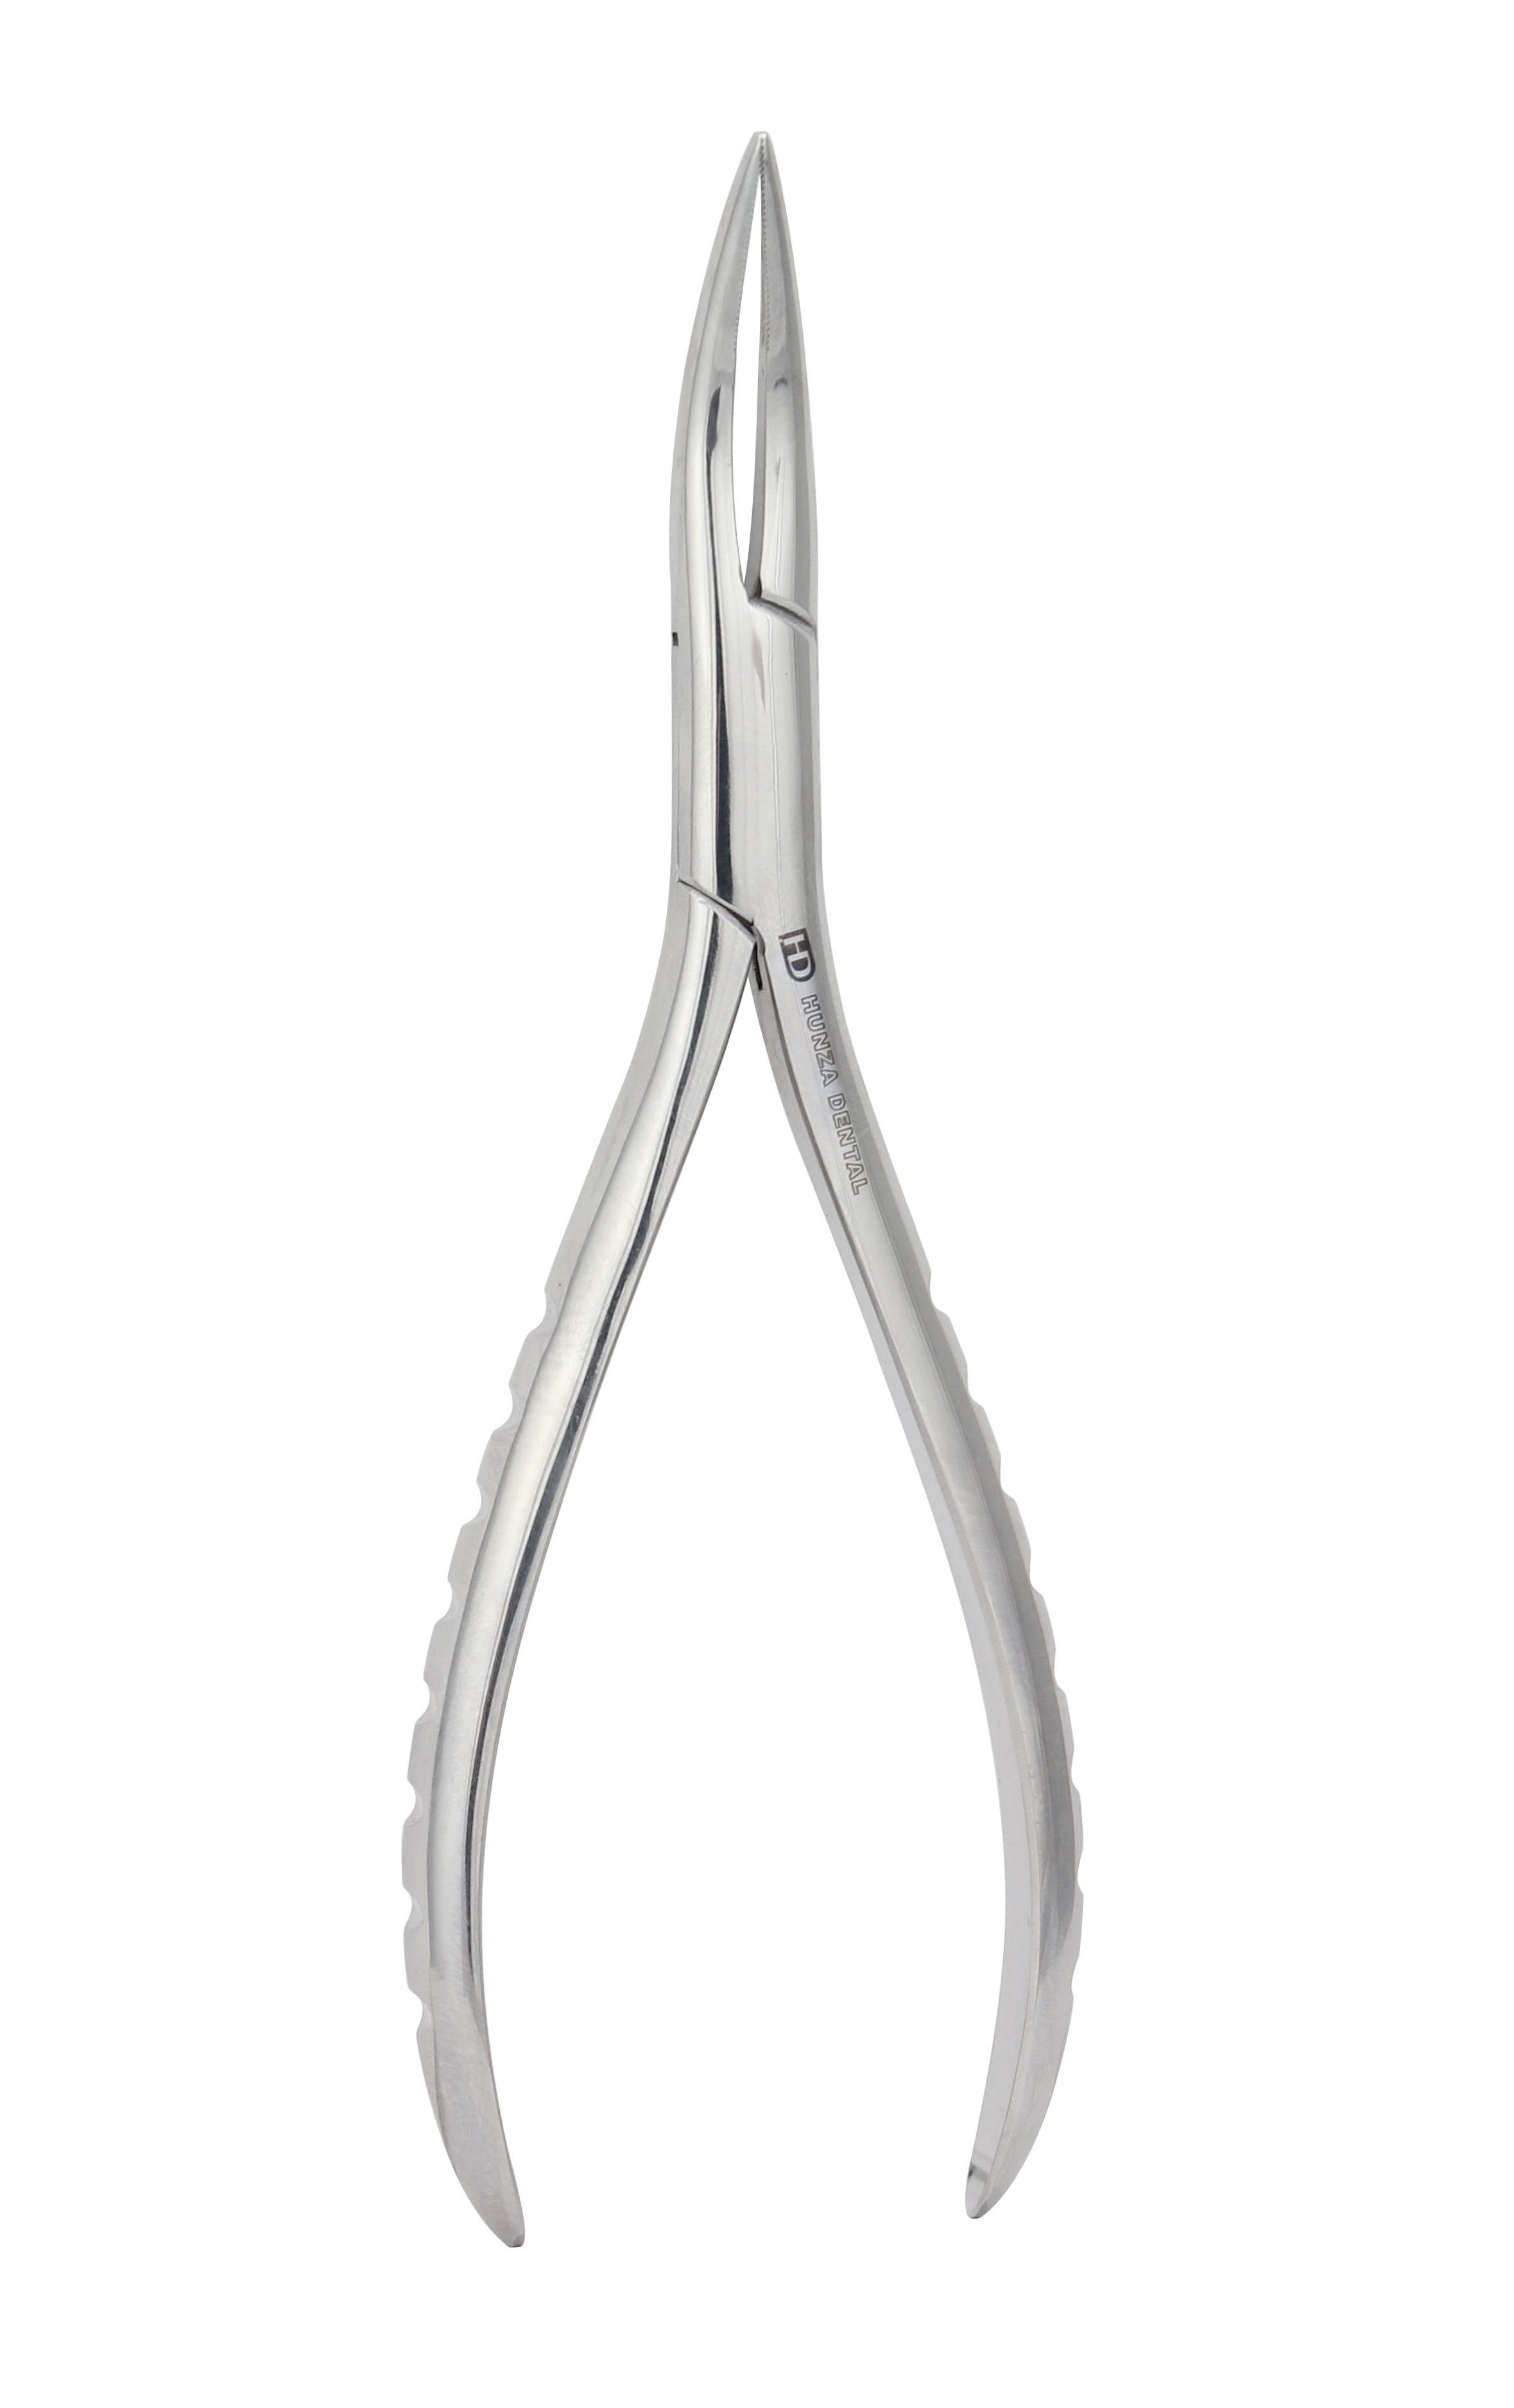 Extraction Forceps 300, Serrated Tip